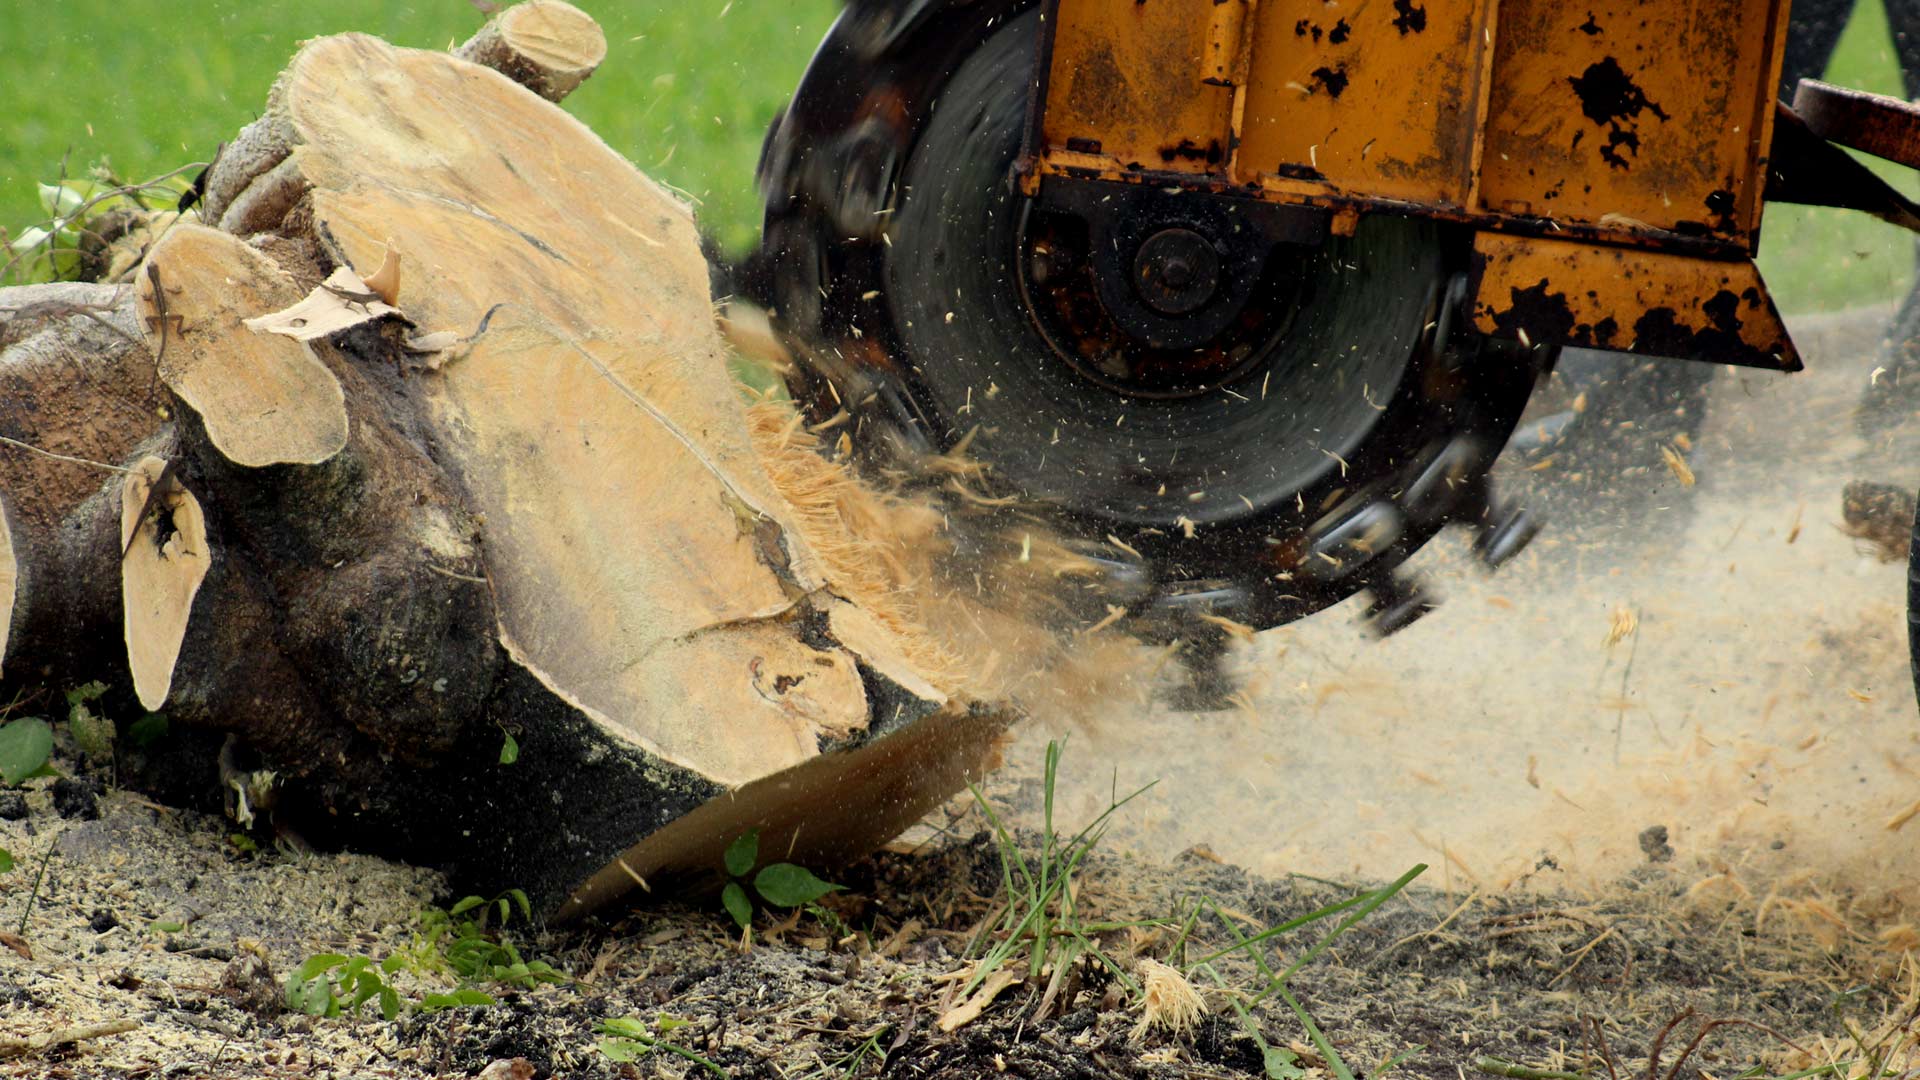 Stump grinding service being performed in Laveen, AZ.